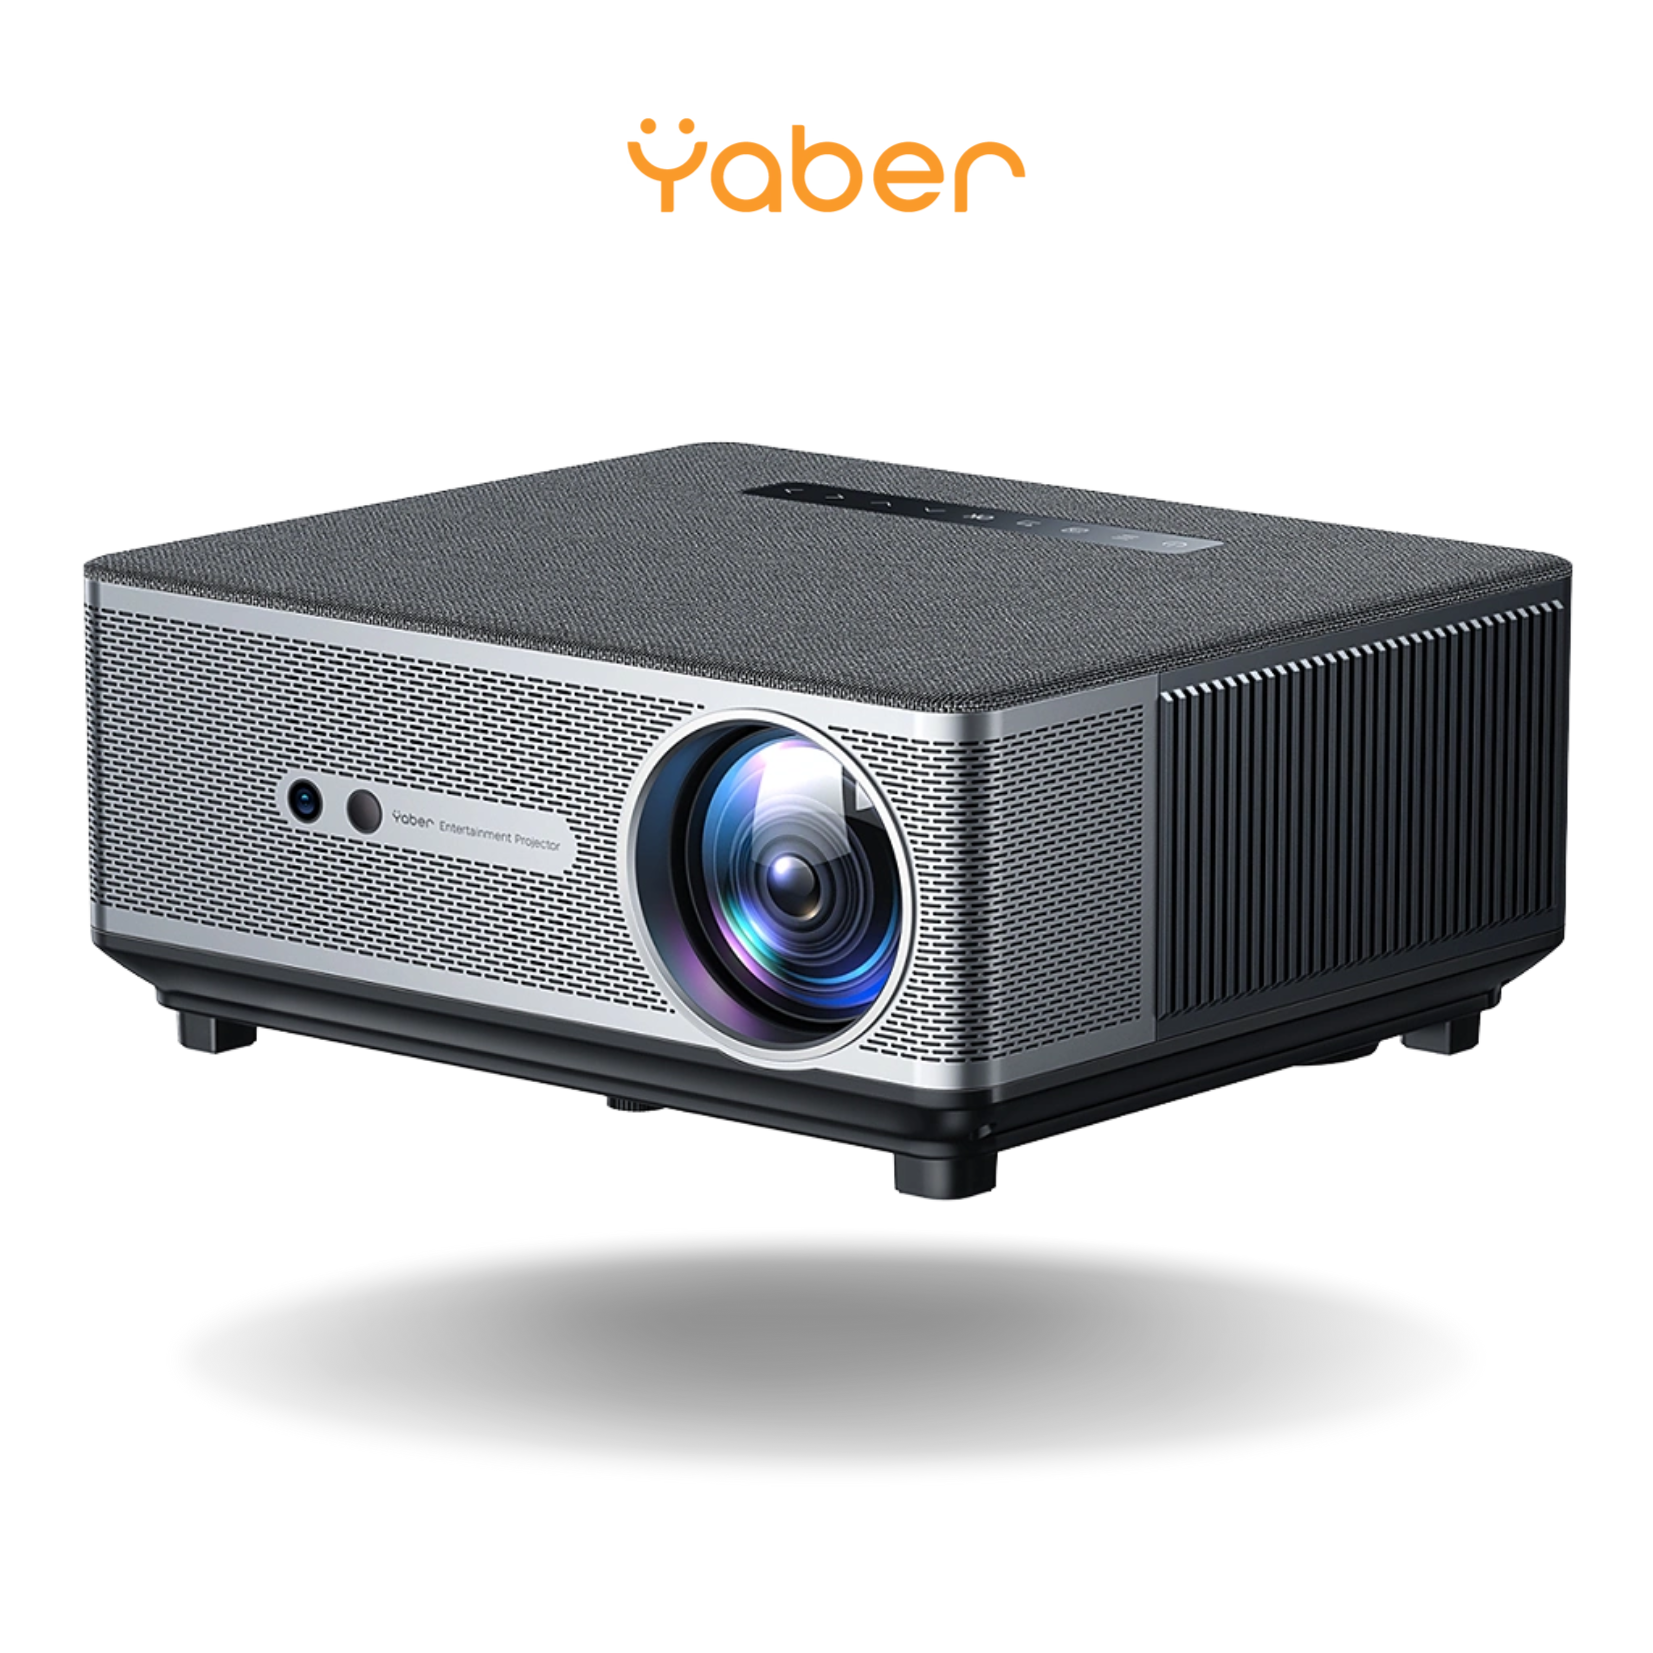 Unboxing  Yaber K2s Smart Projector has Launched! Let's Unbox Together! 